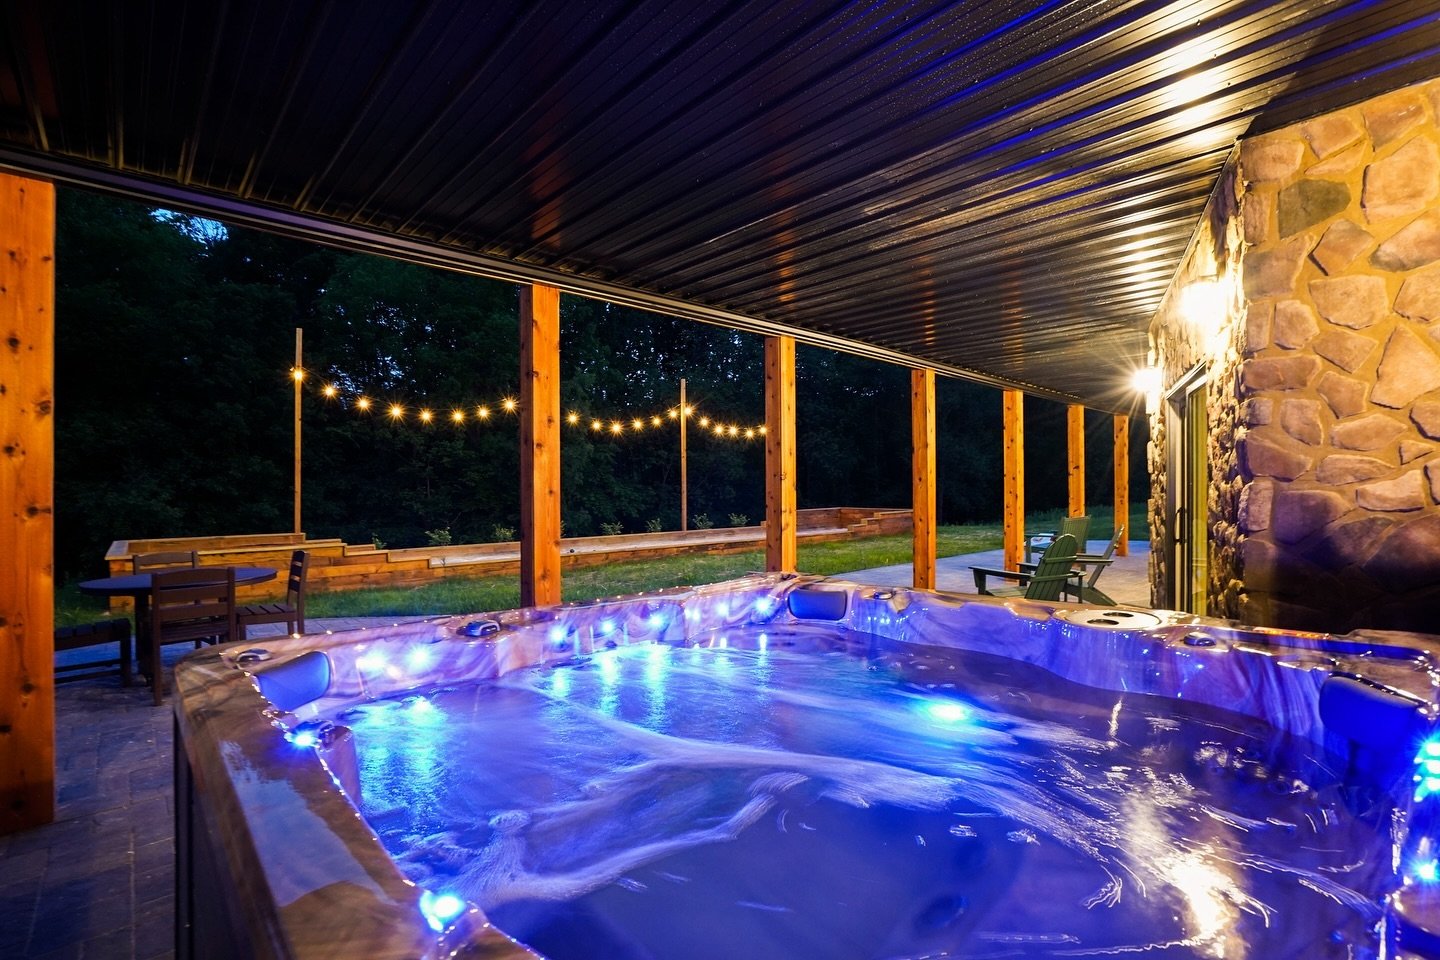 Soak up the relaxation during your stay 🌿💧🧘

#hockinghills #cabinlife #cabingetaway #ohiocabins #vacationrentalsbyowner #hockinghillsstatepark #ohio #cabincrew #outdoorliving